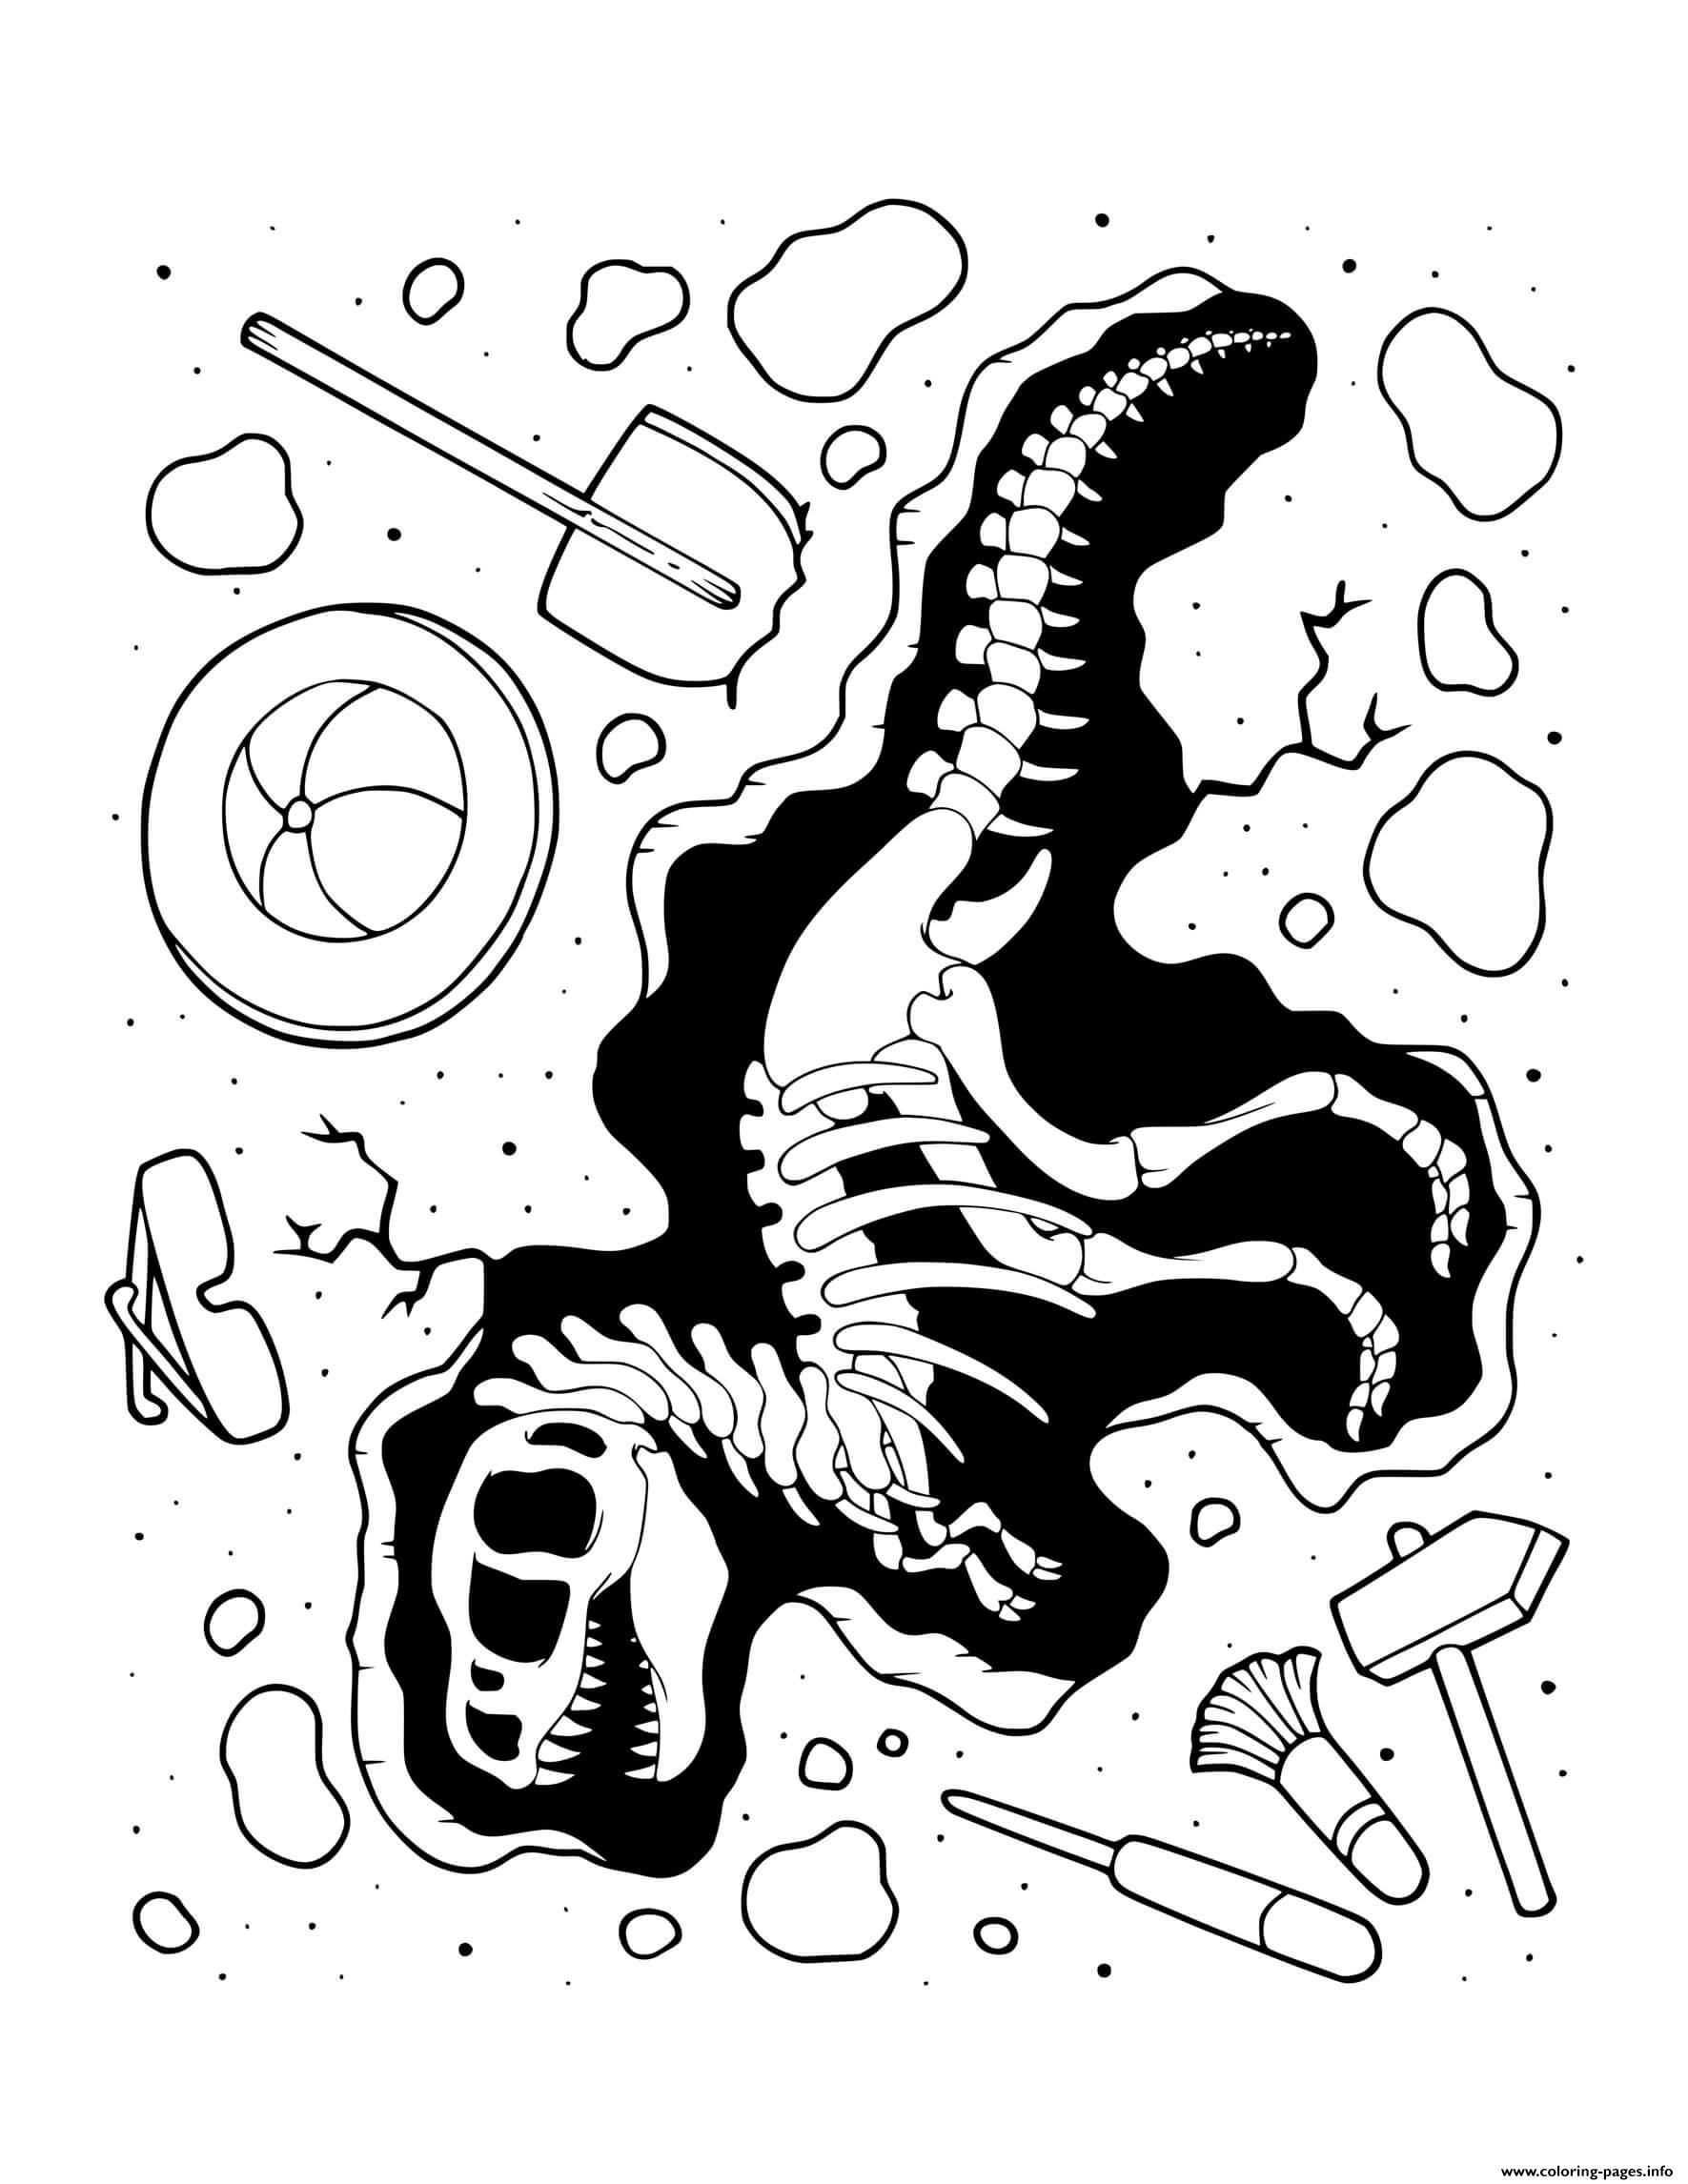 Download Dinosaur Fossil Excavation Coloring Pages Printable